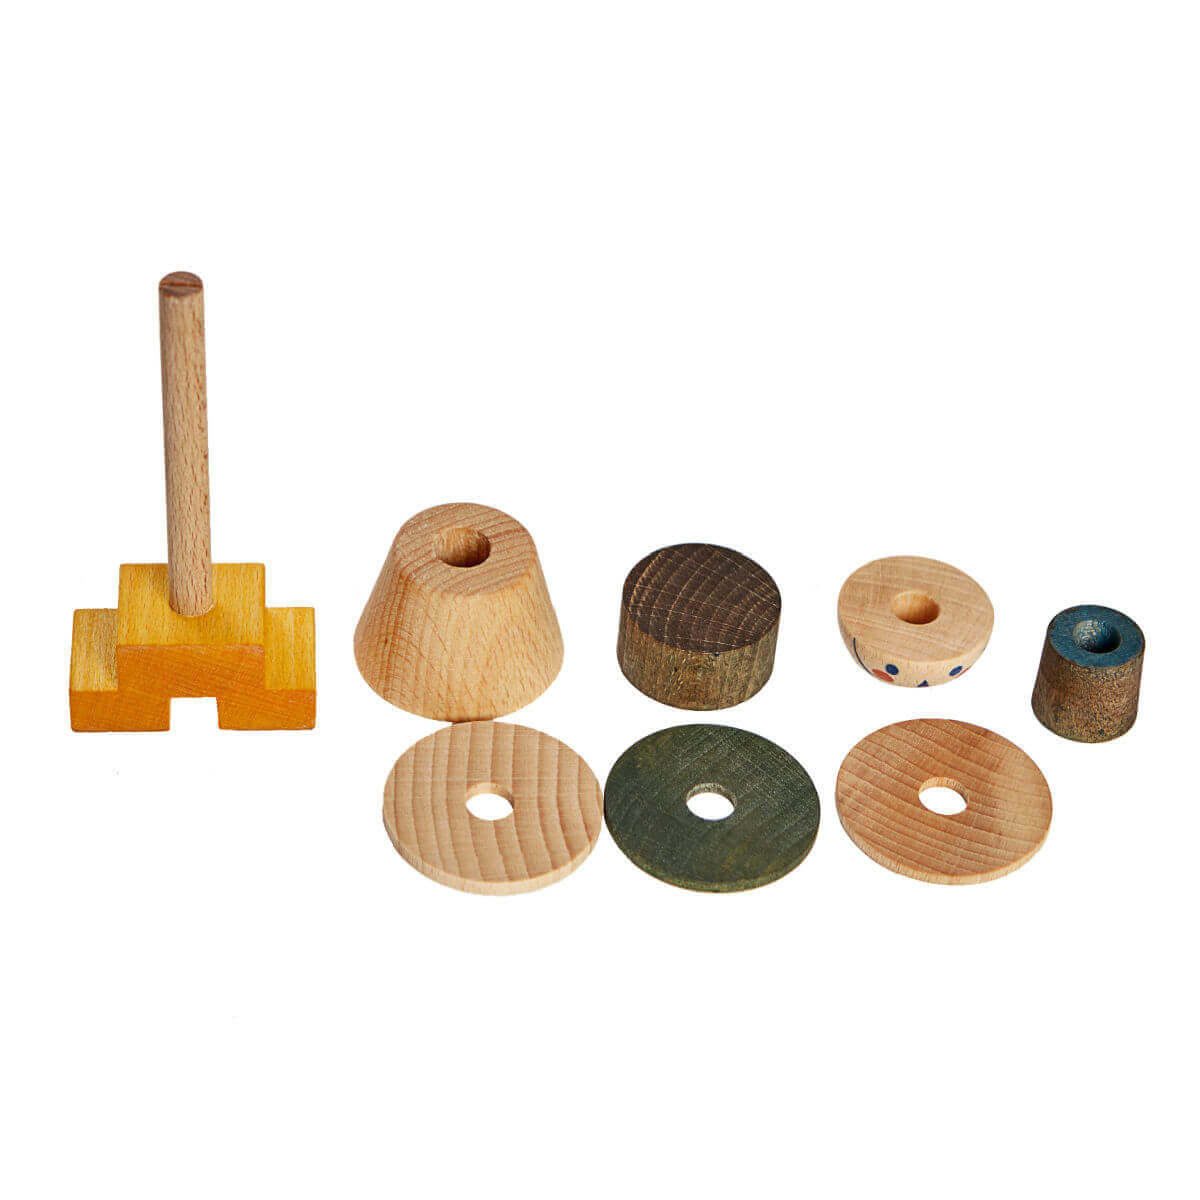 Stick Fig. No. 03 wooden stacking toy by Wooden Story